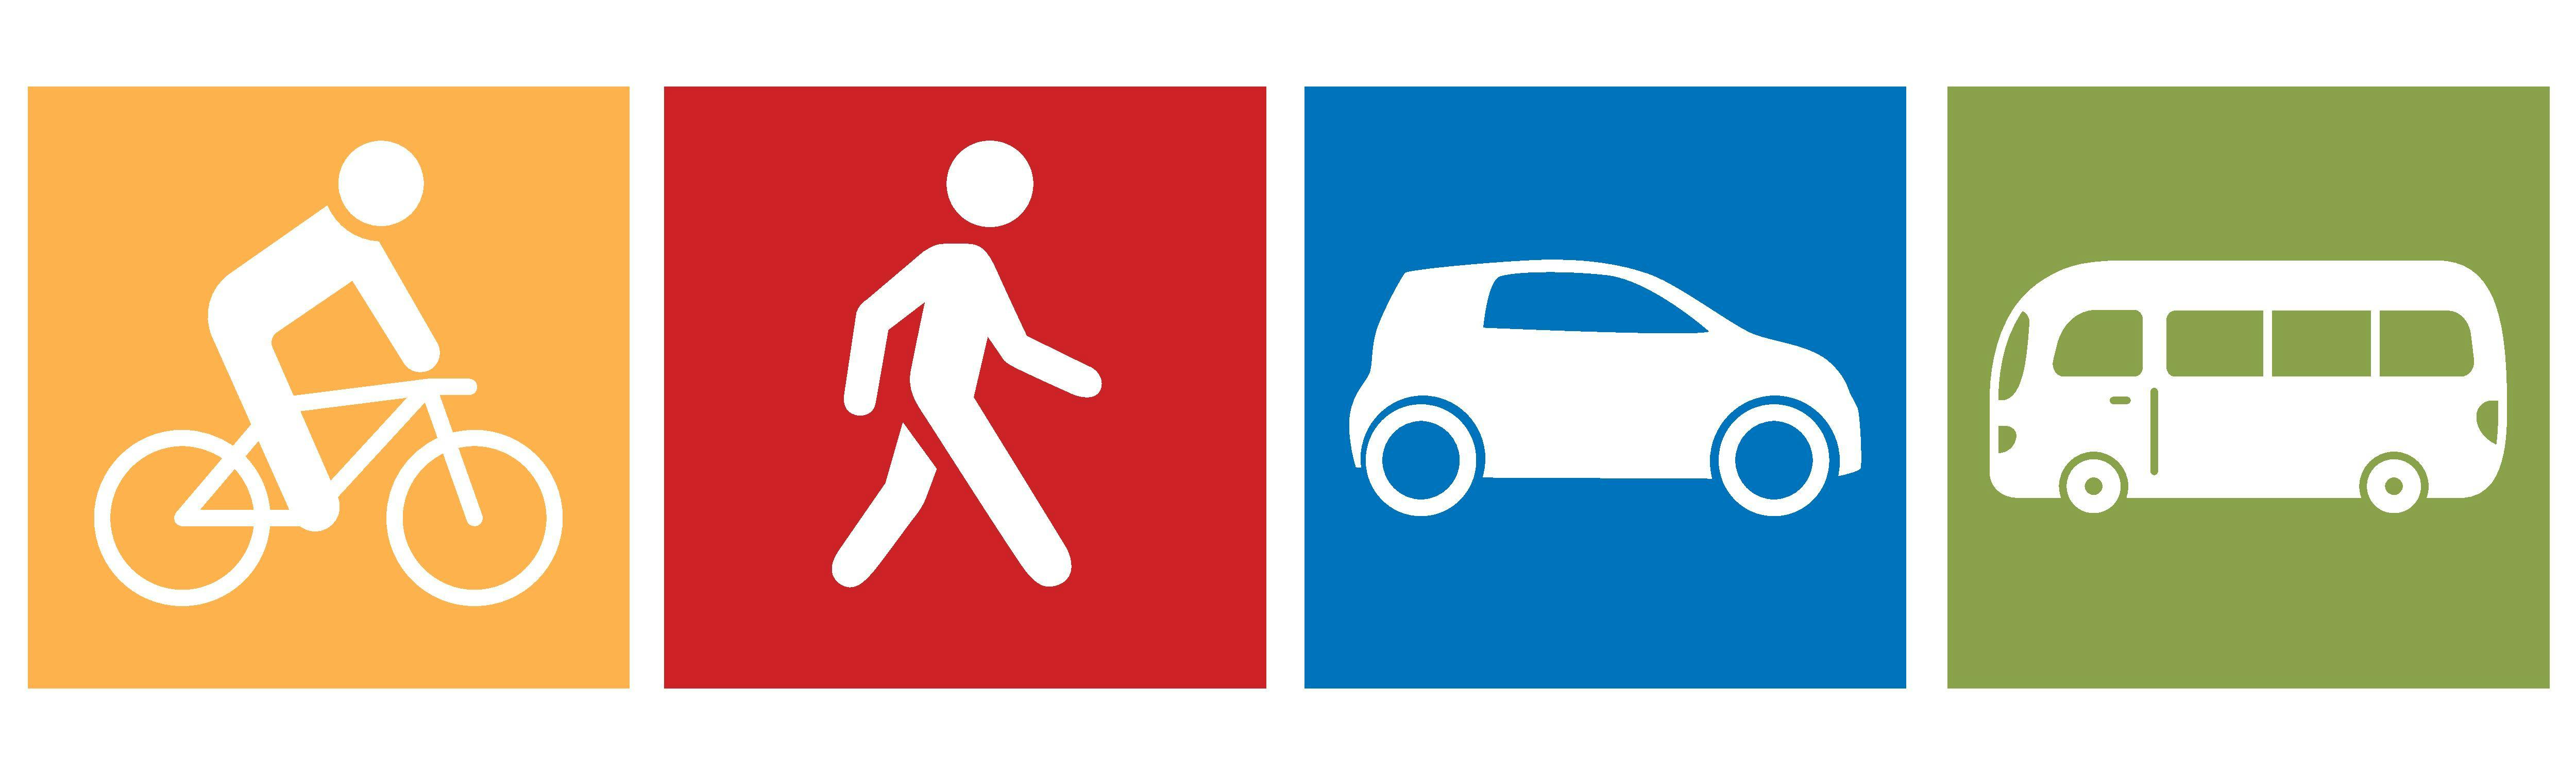 Banner with cyclist, person walking, car and bus. 